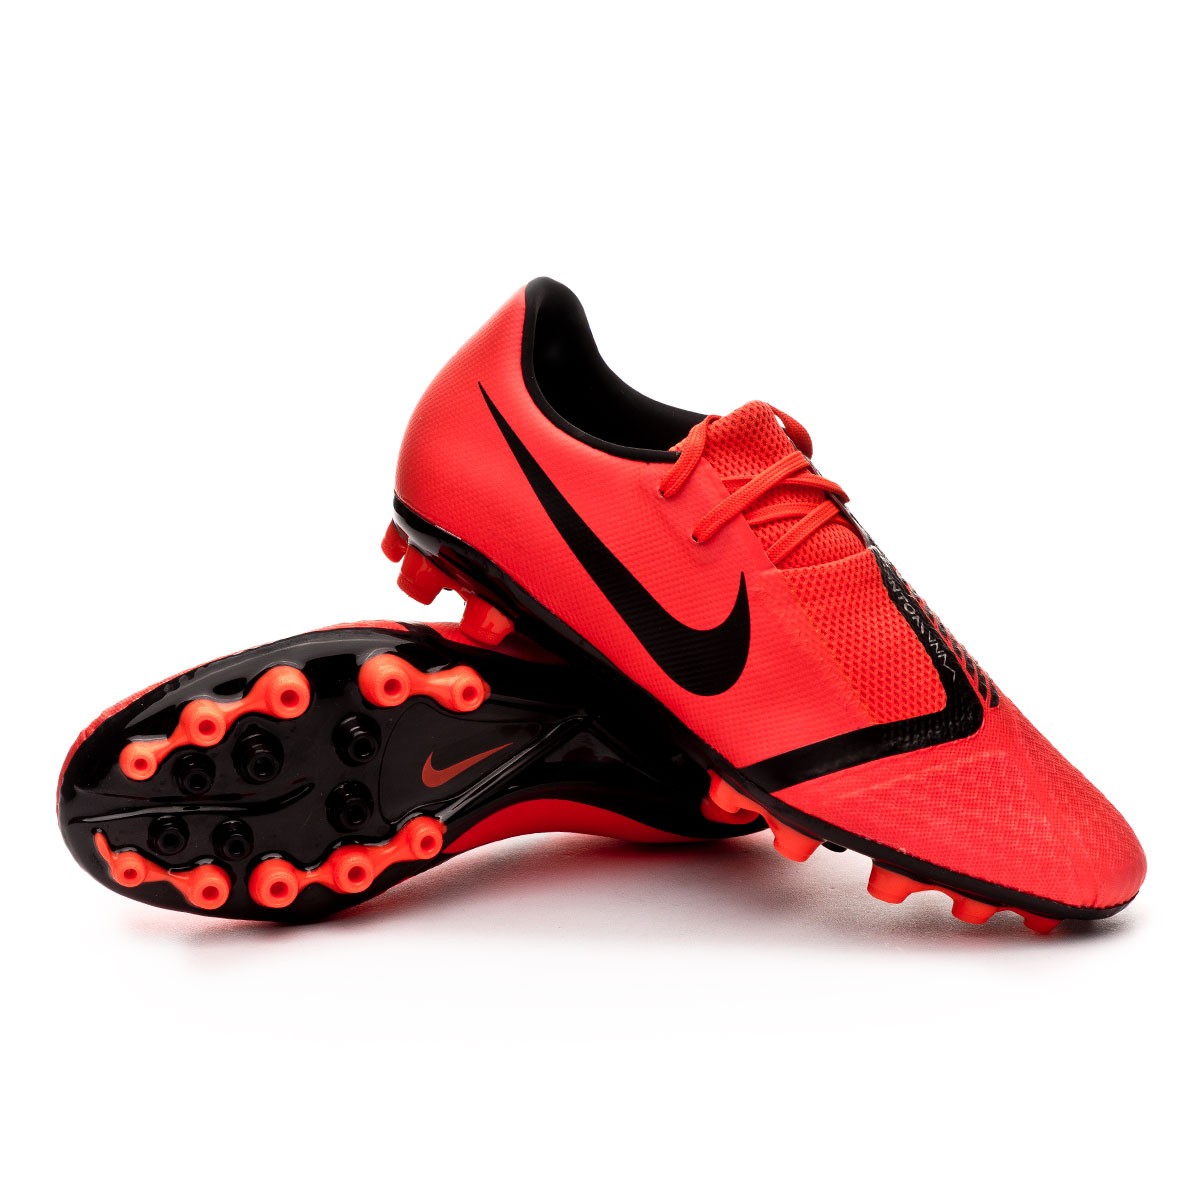 nike 3g boots